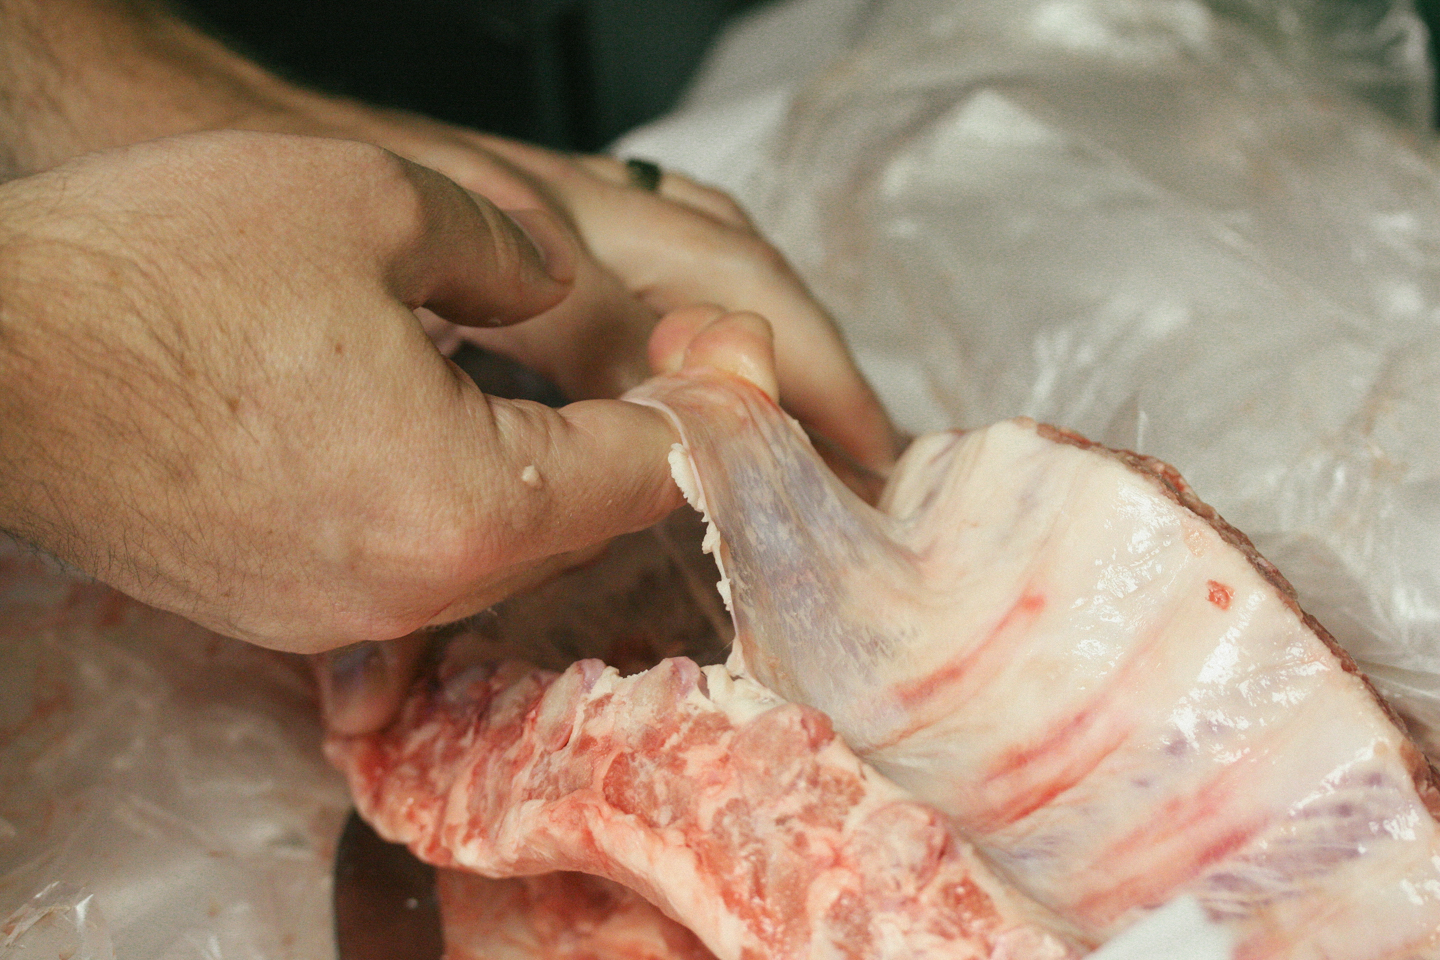 Then get your hand under the membrane to remove